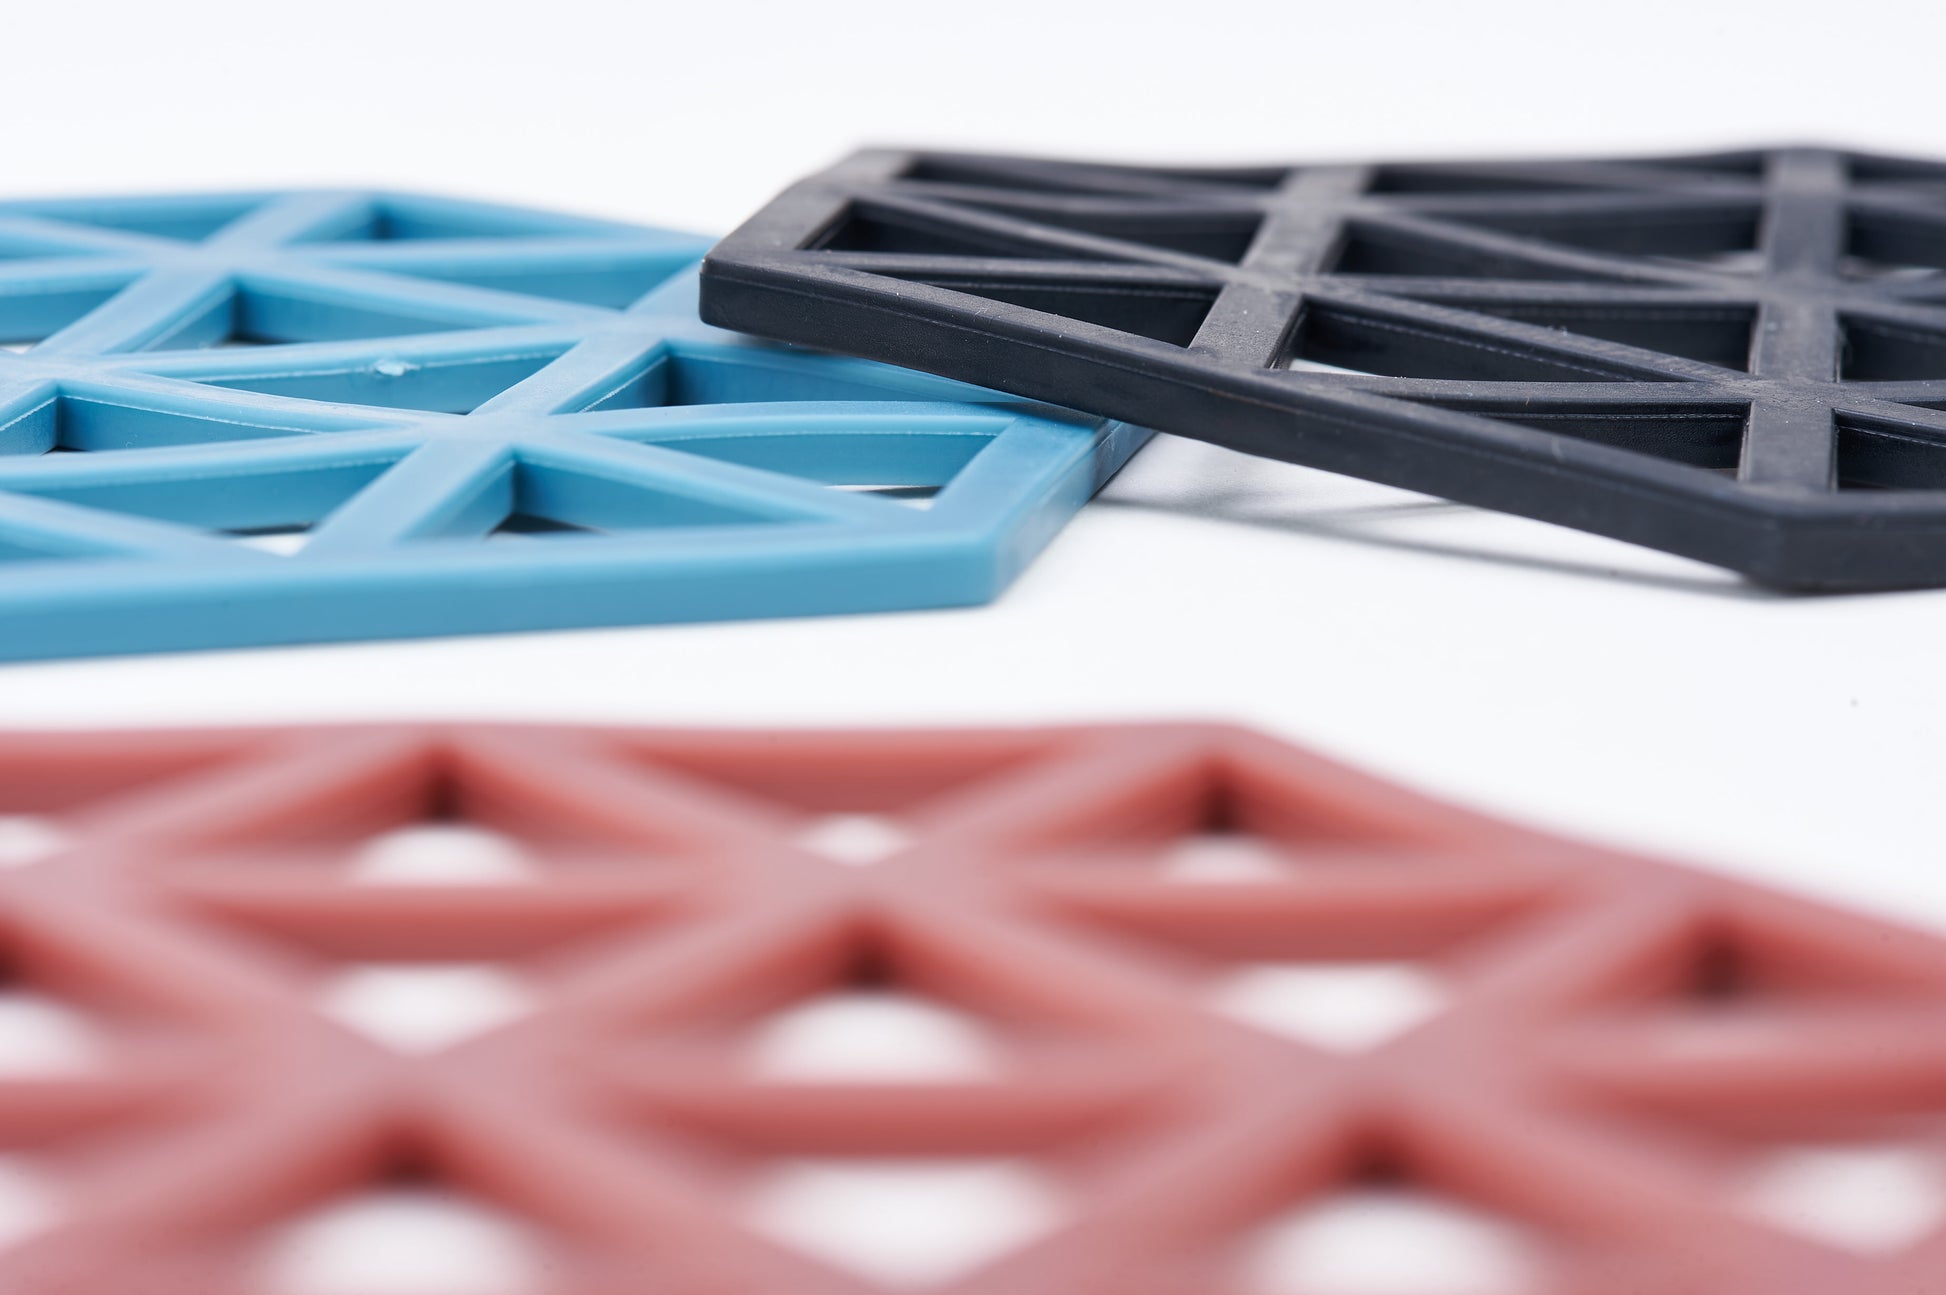 Hexagon Silicone Trivet - Lucid and Real